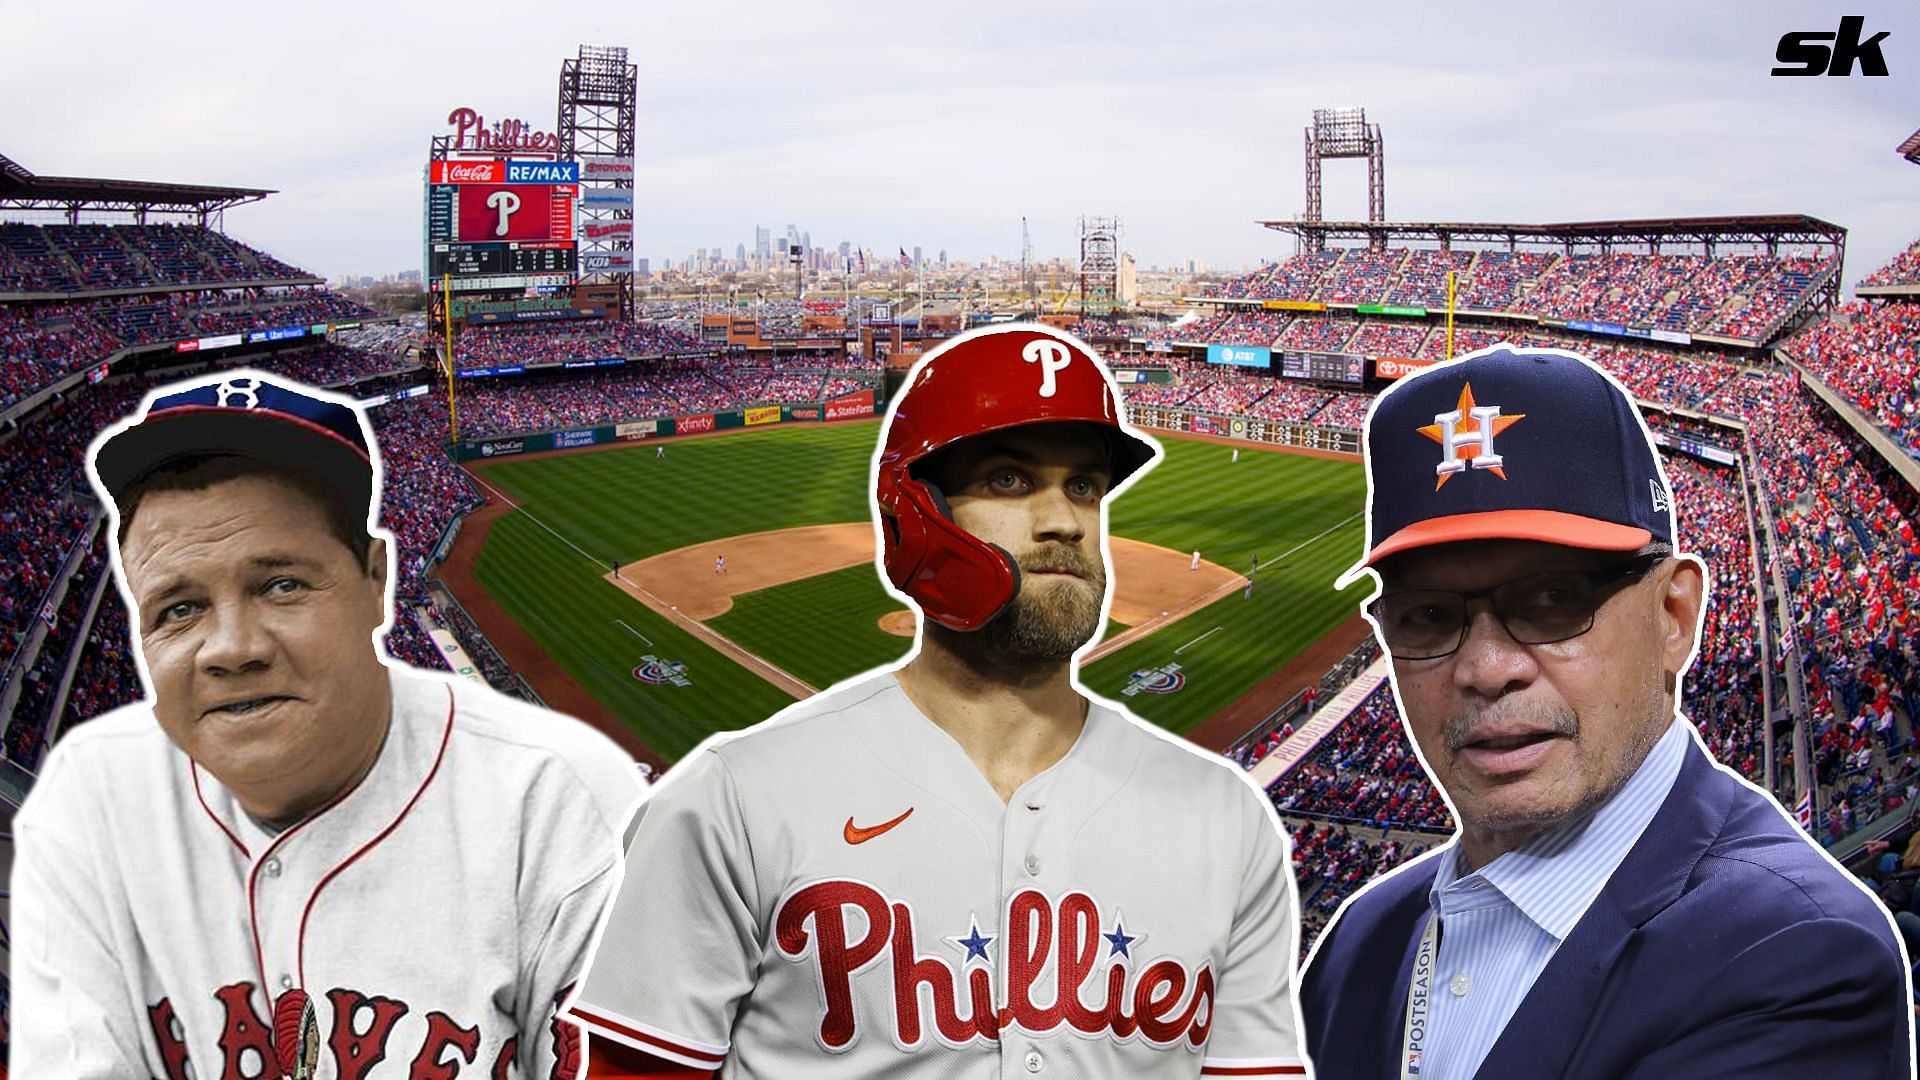 MLB analyst claims Bryce Harper is on the same playoff plane as legends Babe Ruth and Reggie